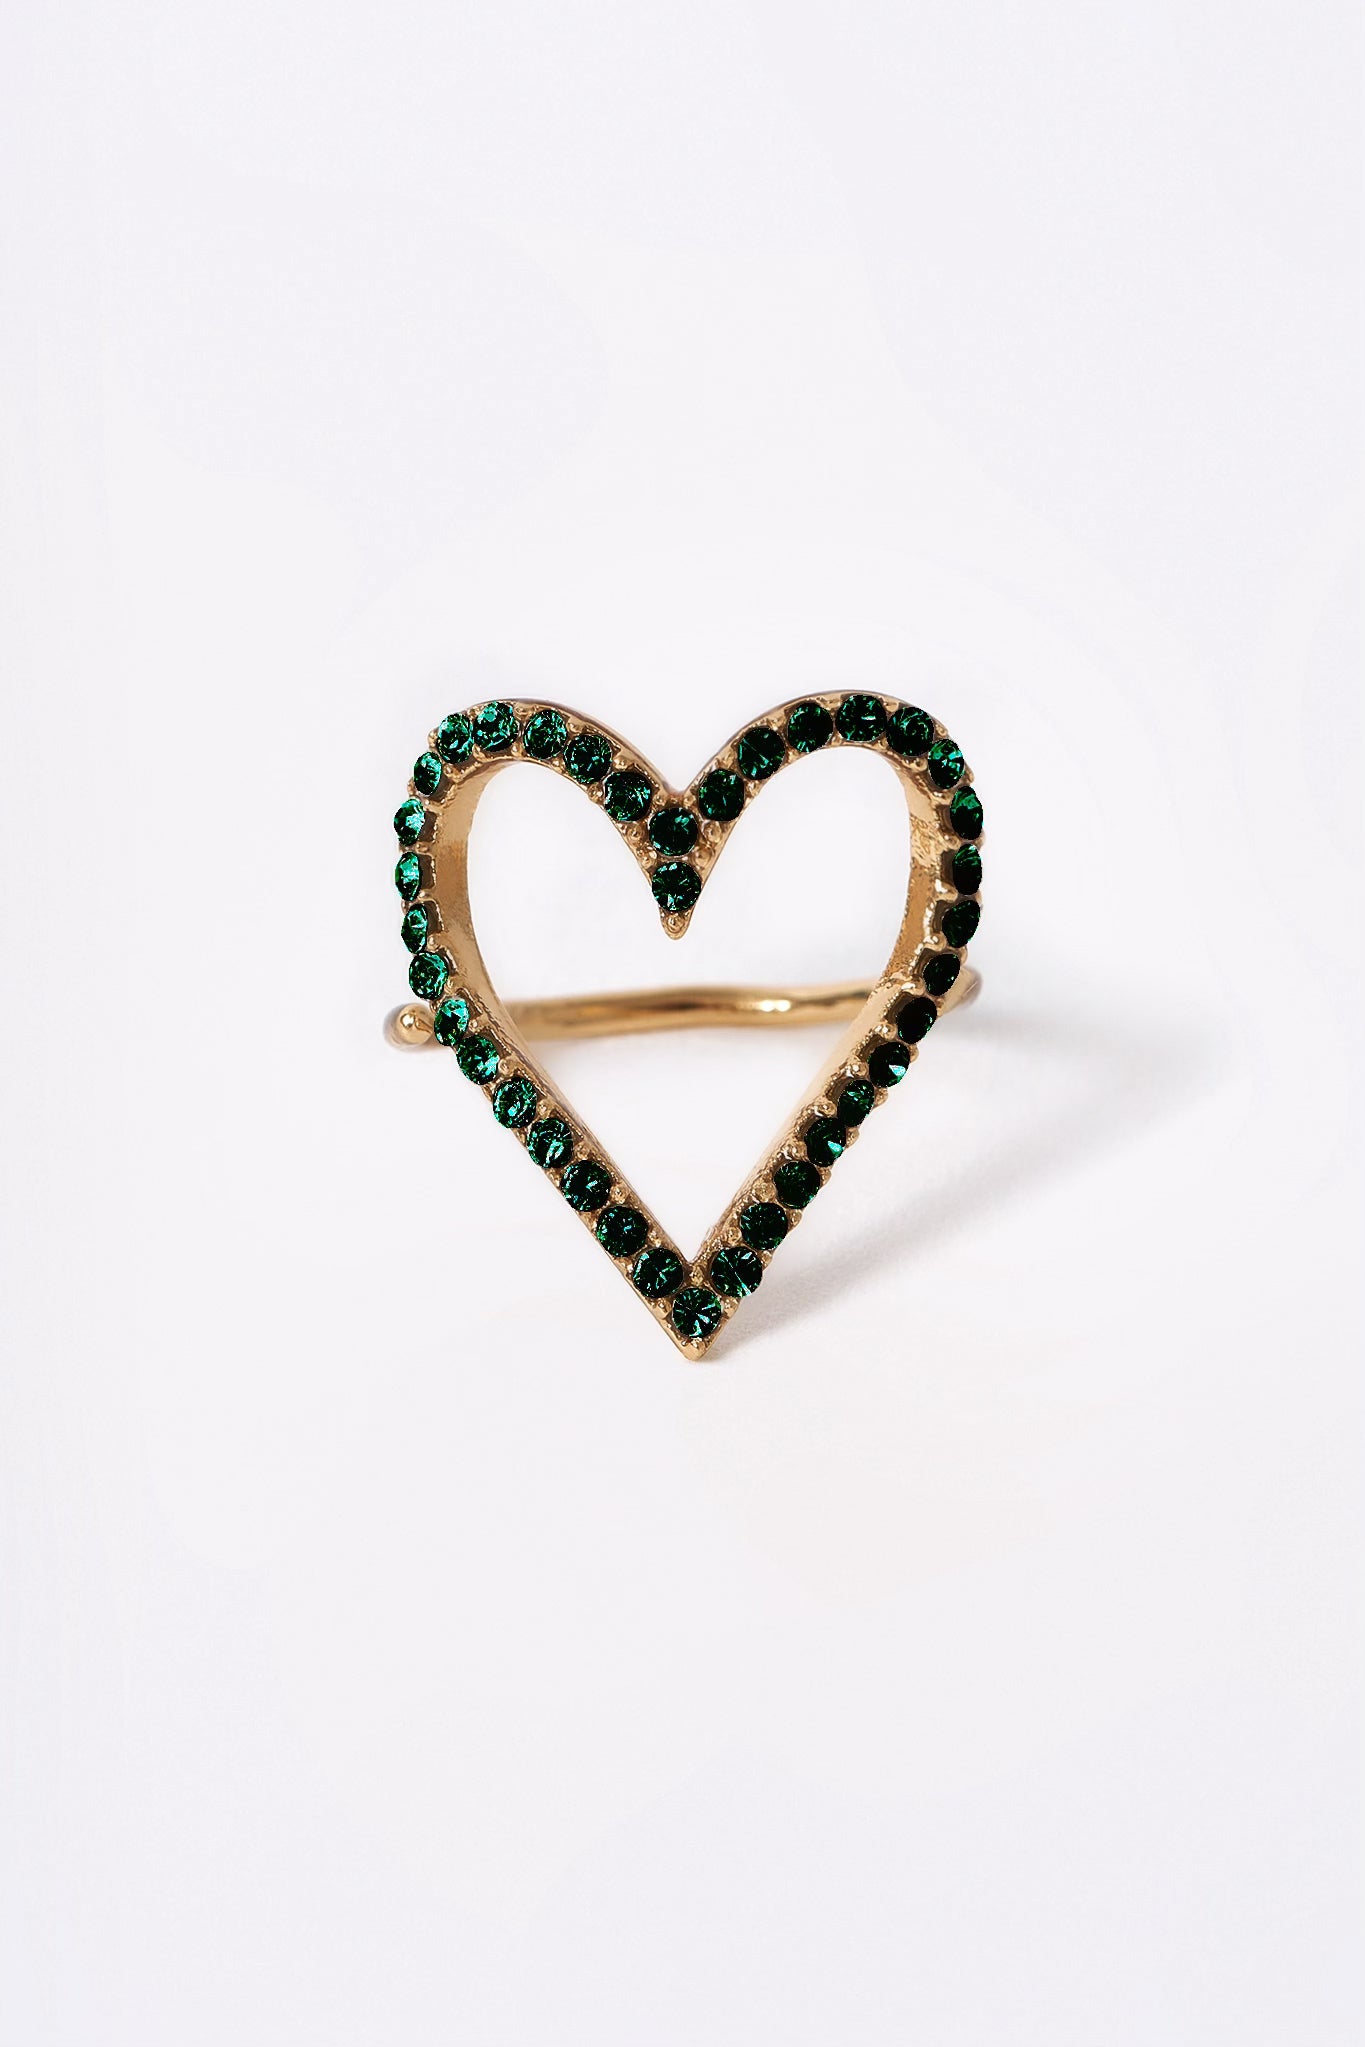 THE HEART RING